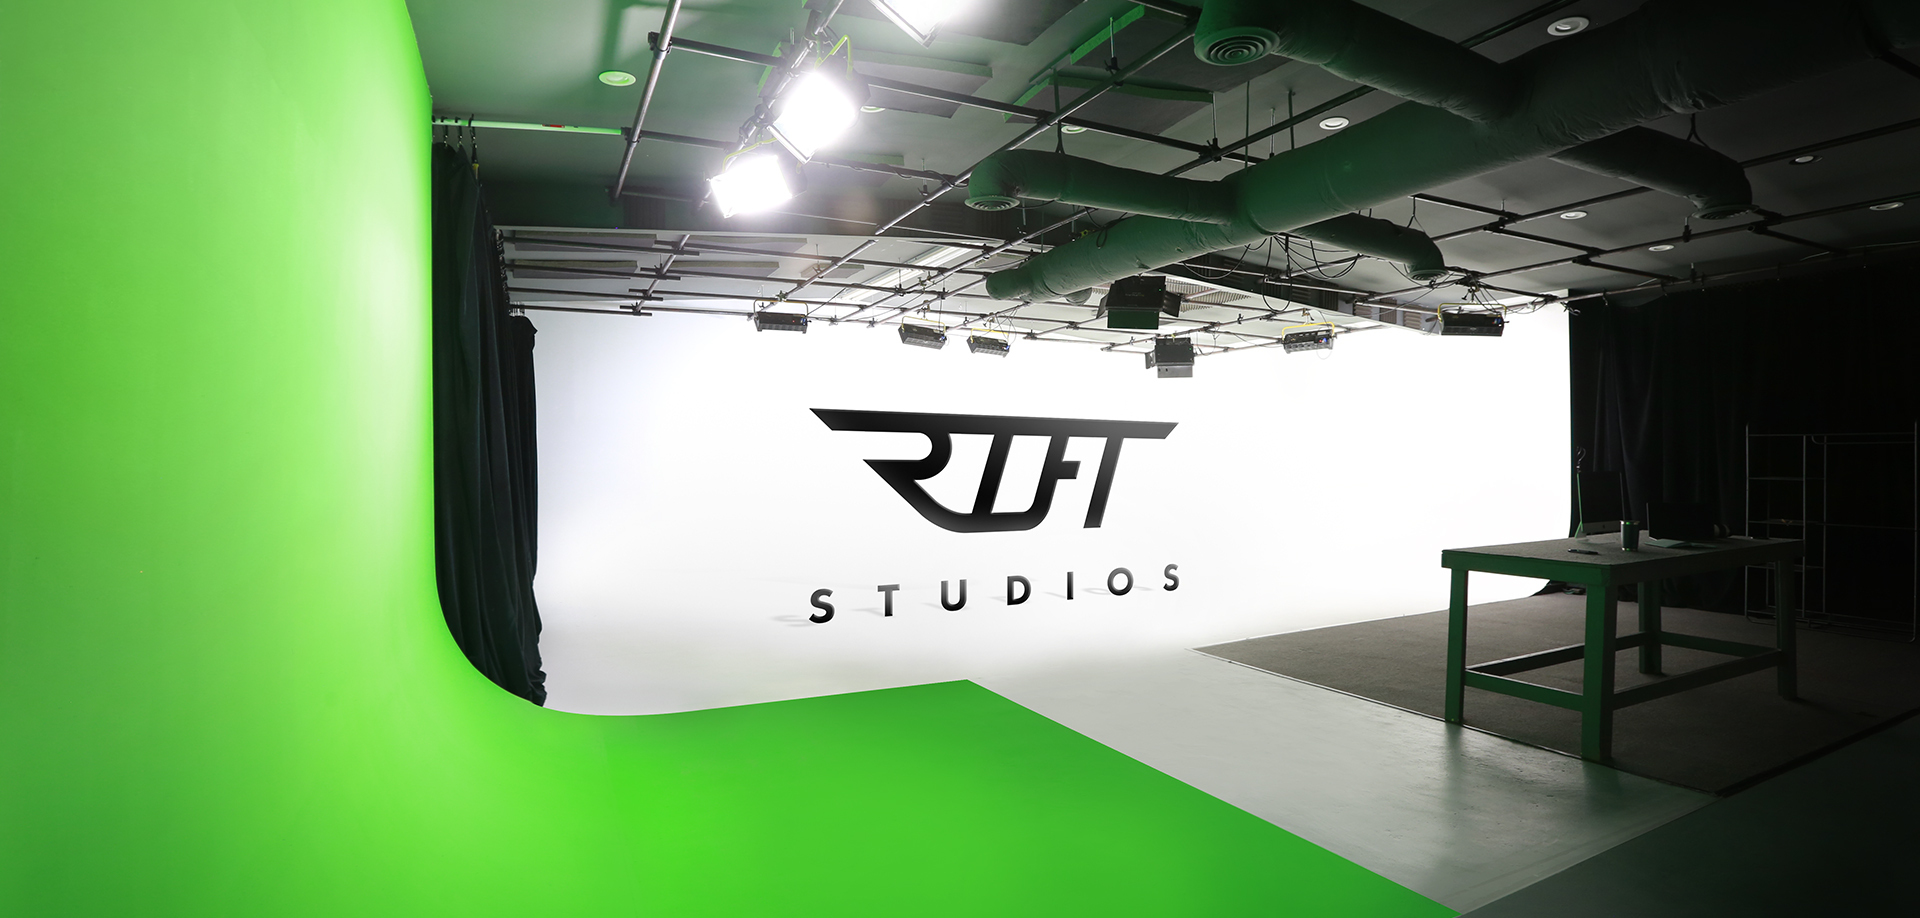 photo of Rift Studios green and white cyc wall with Rift logo on white wall